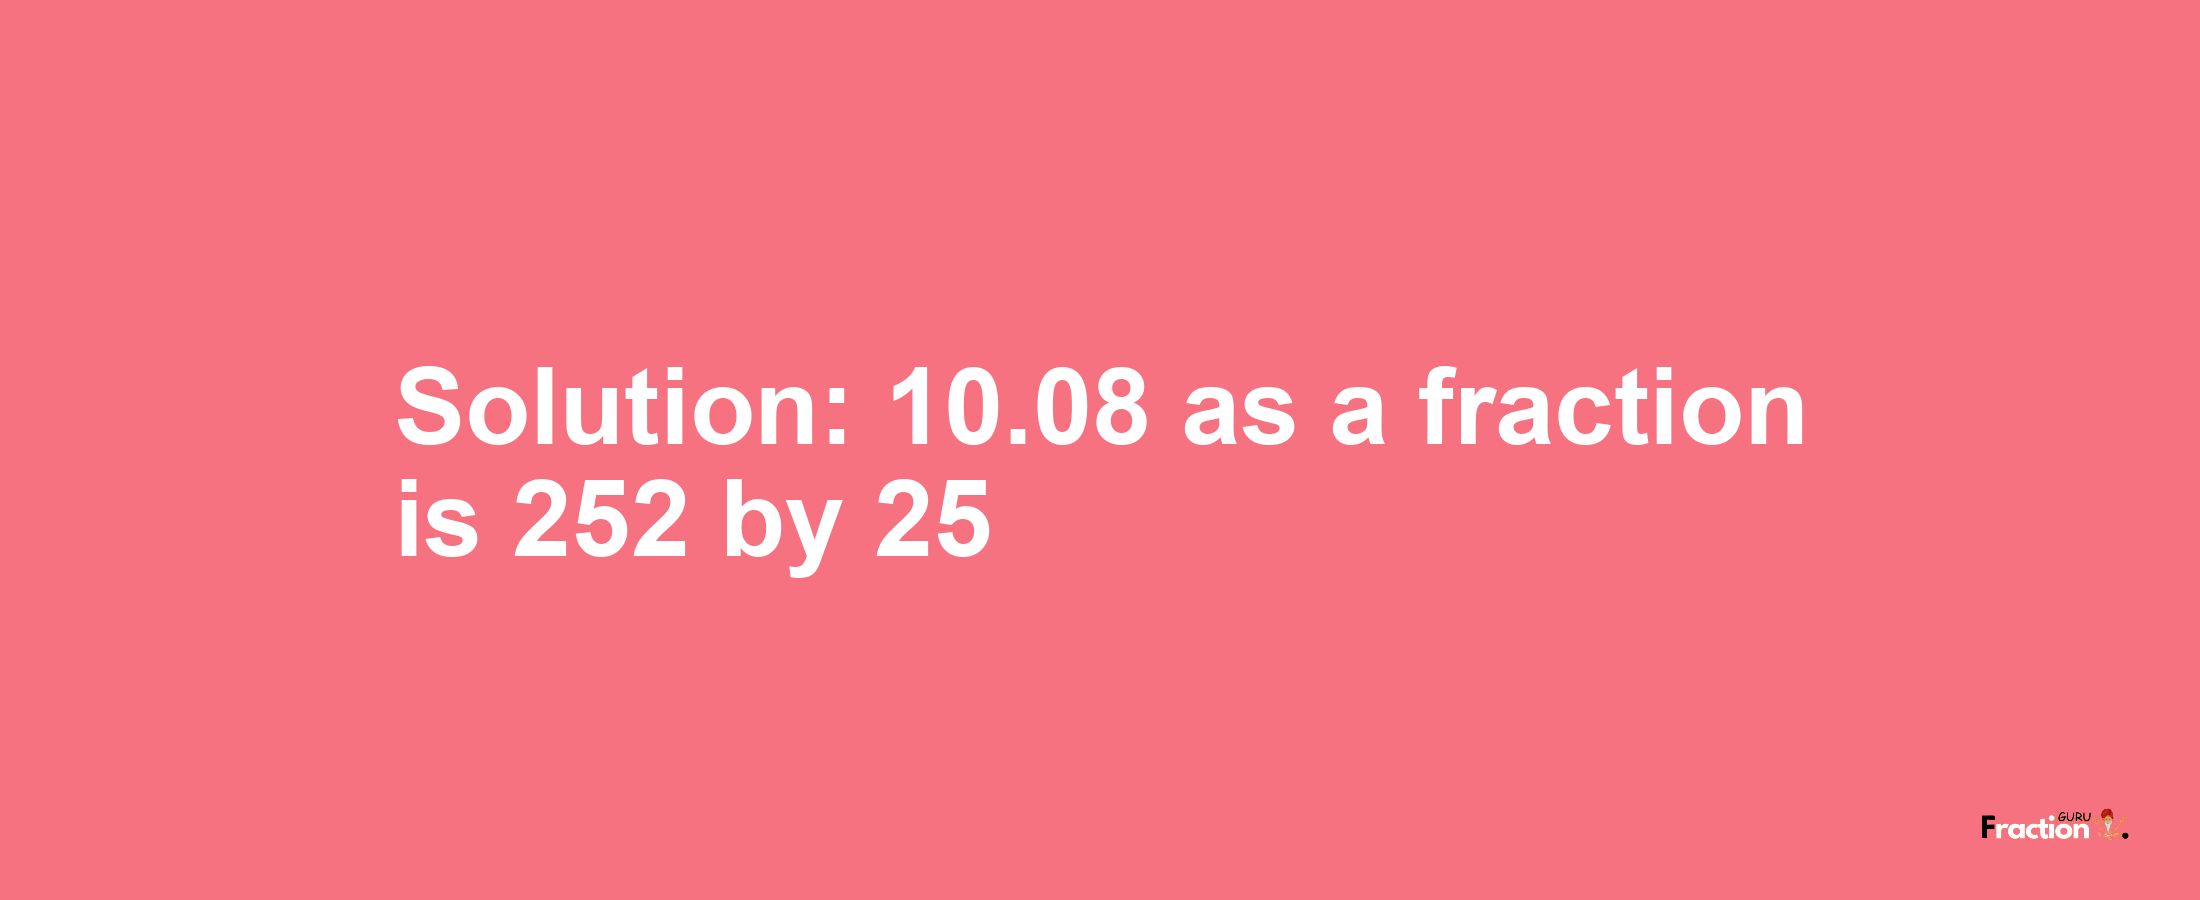 Solution:10.08 as a fraction is 252/25